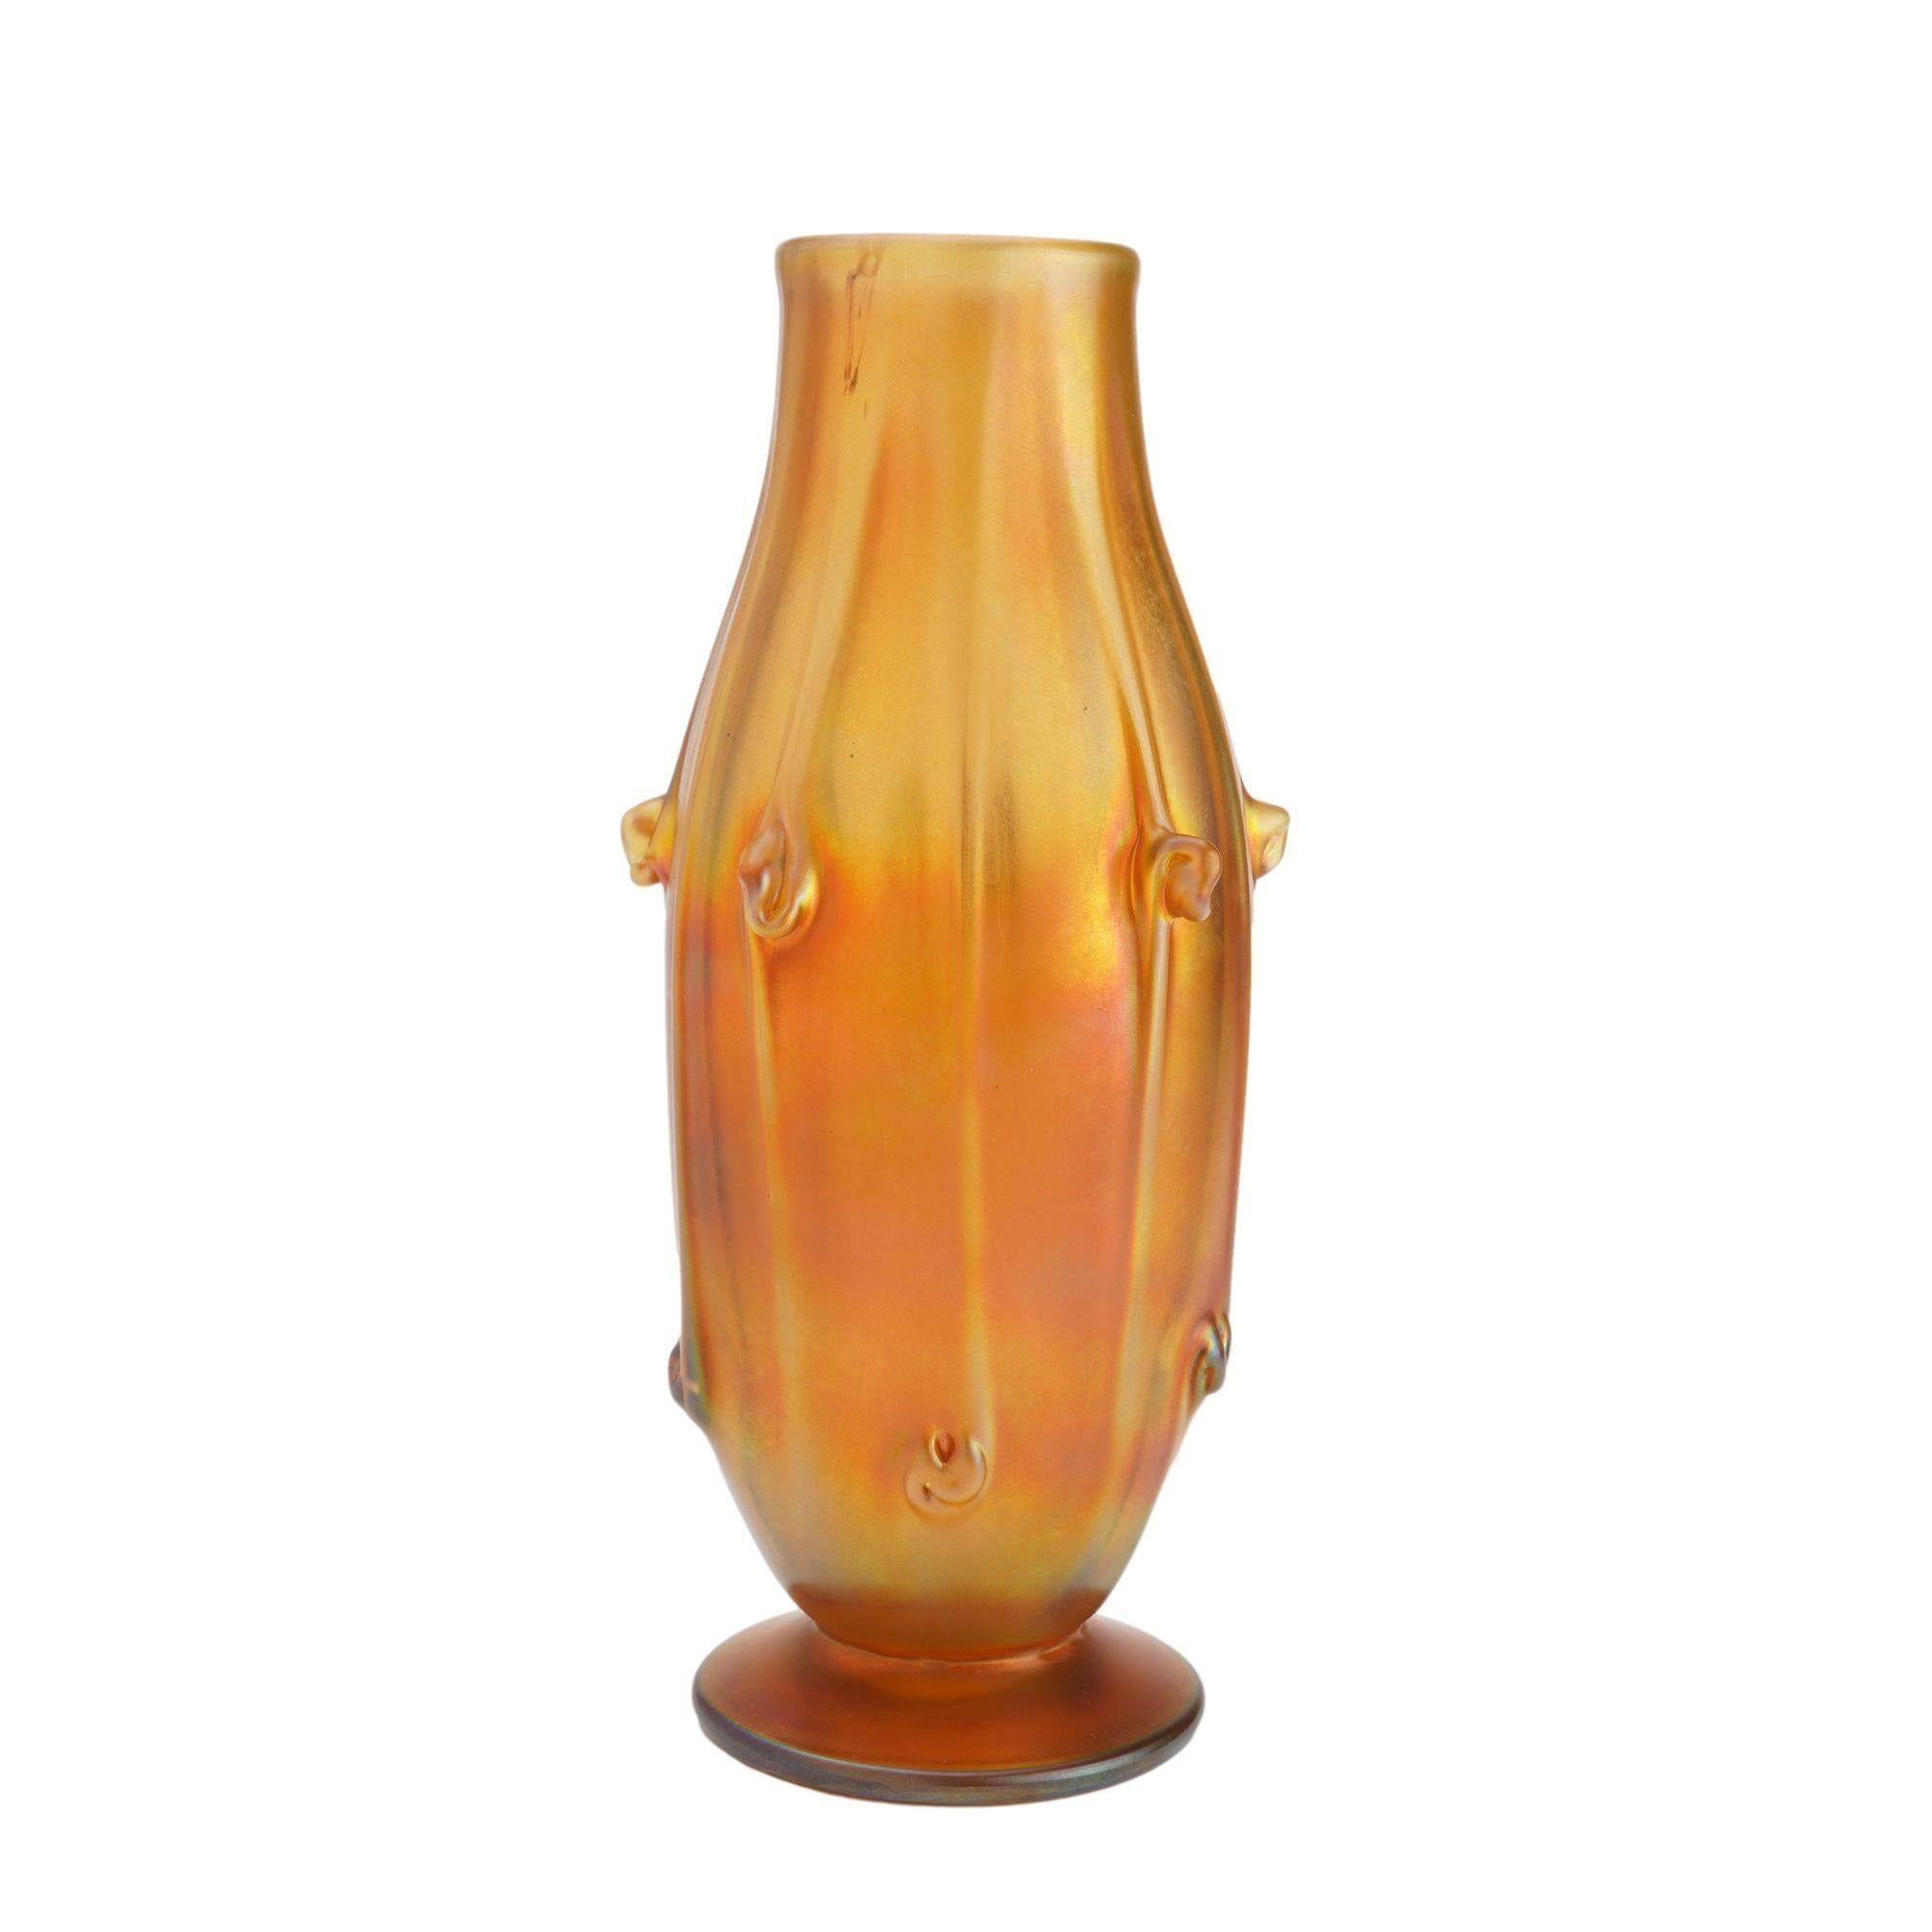 A distinctive elongated barrel form footed Favrile glass vase in iridescent gold. The surface of the vase is distinguished with elongated ribs with tight swirls alternating from the shoulder to the the bottom of the barrel which comes to a waisted